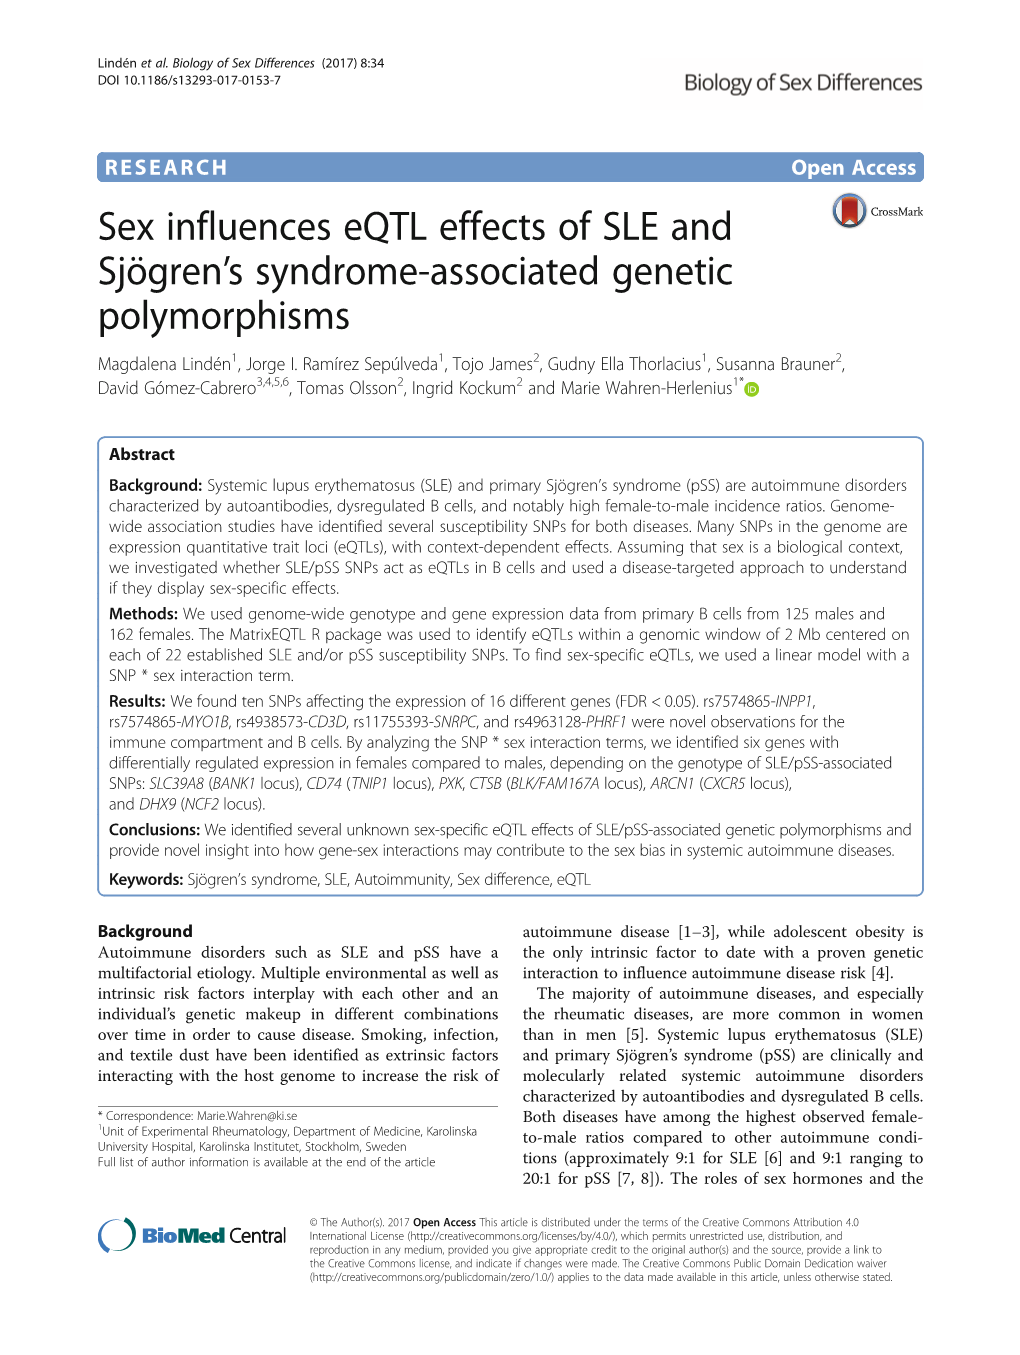 Sex Influences Eqtl Effects of SLE and Sjögren's Syndrome-Associated